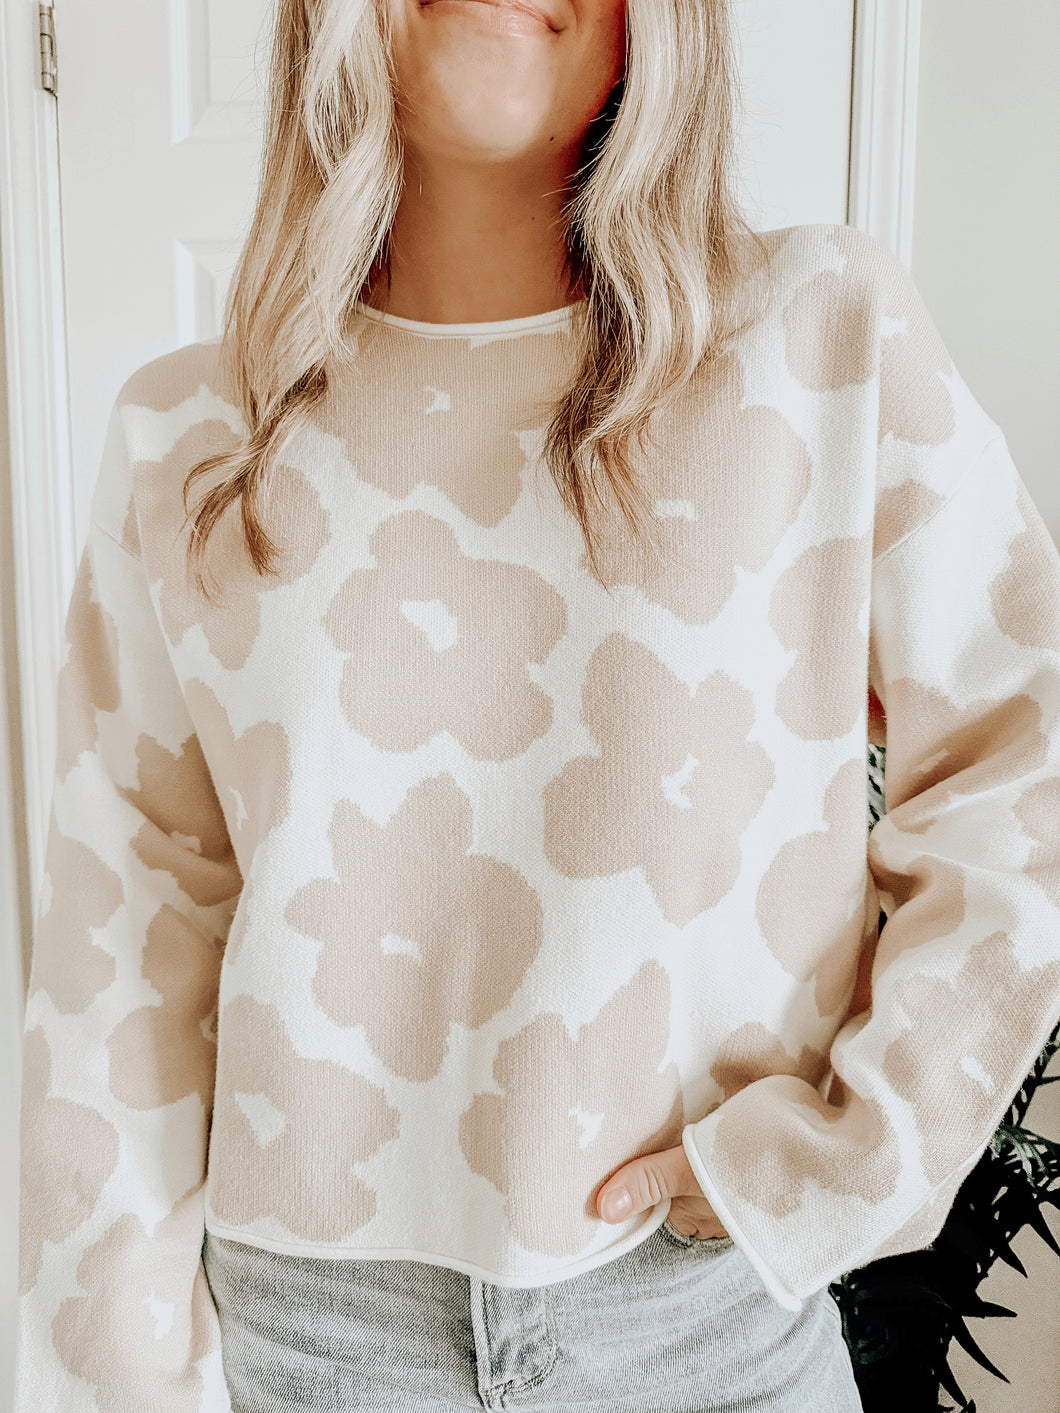 Floral Dreams Sweater